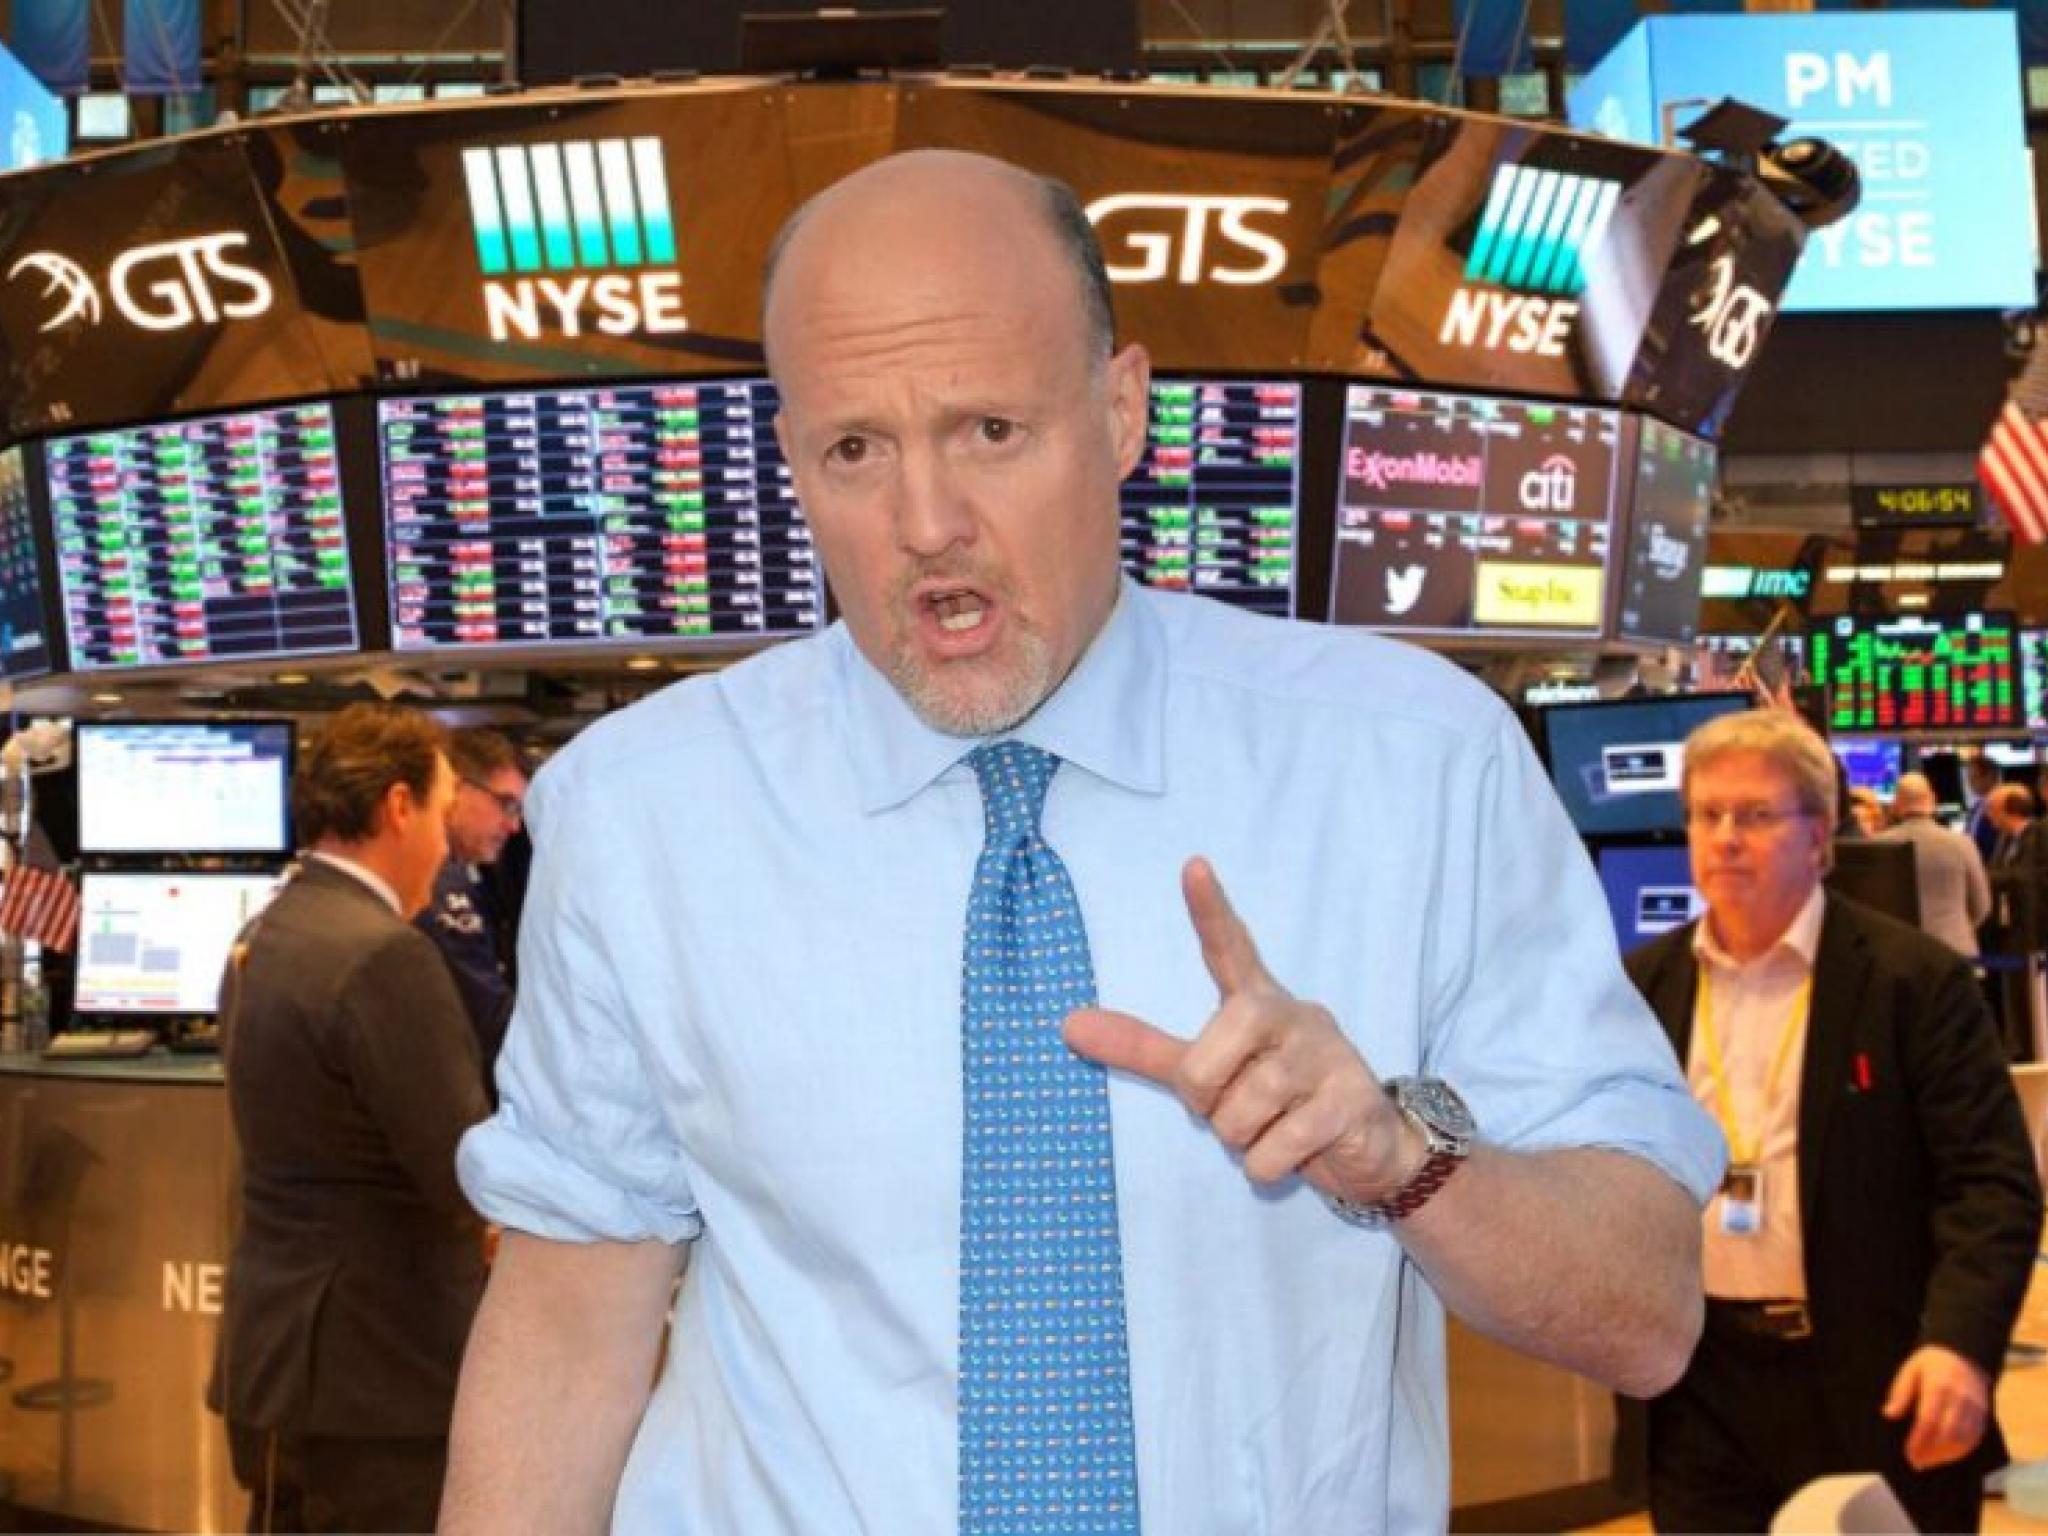  jim-cramer-this-industrial-stock-is-doing-very-well-heres-his-take-on-palantir 